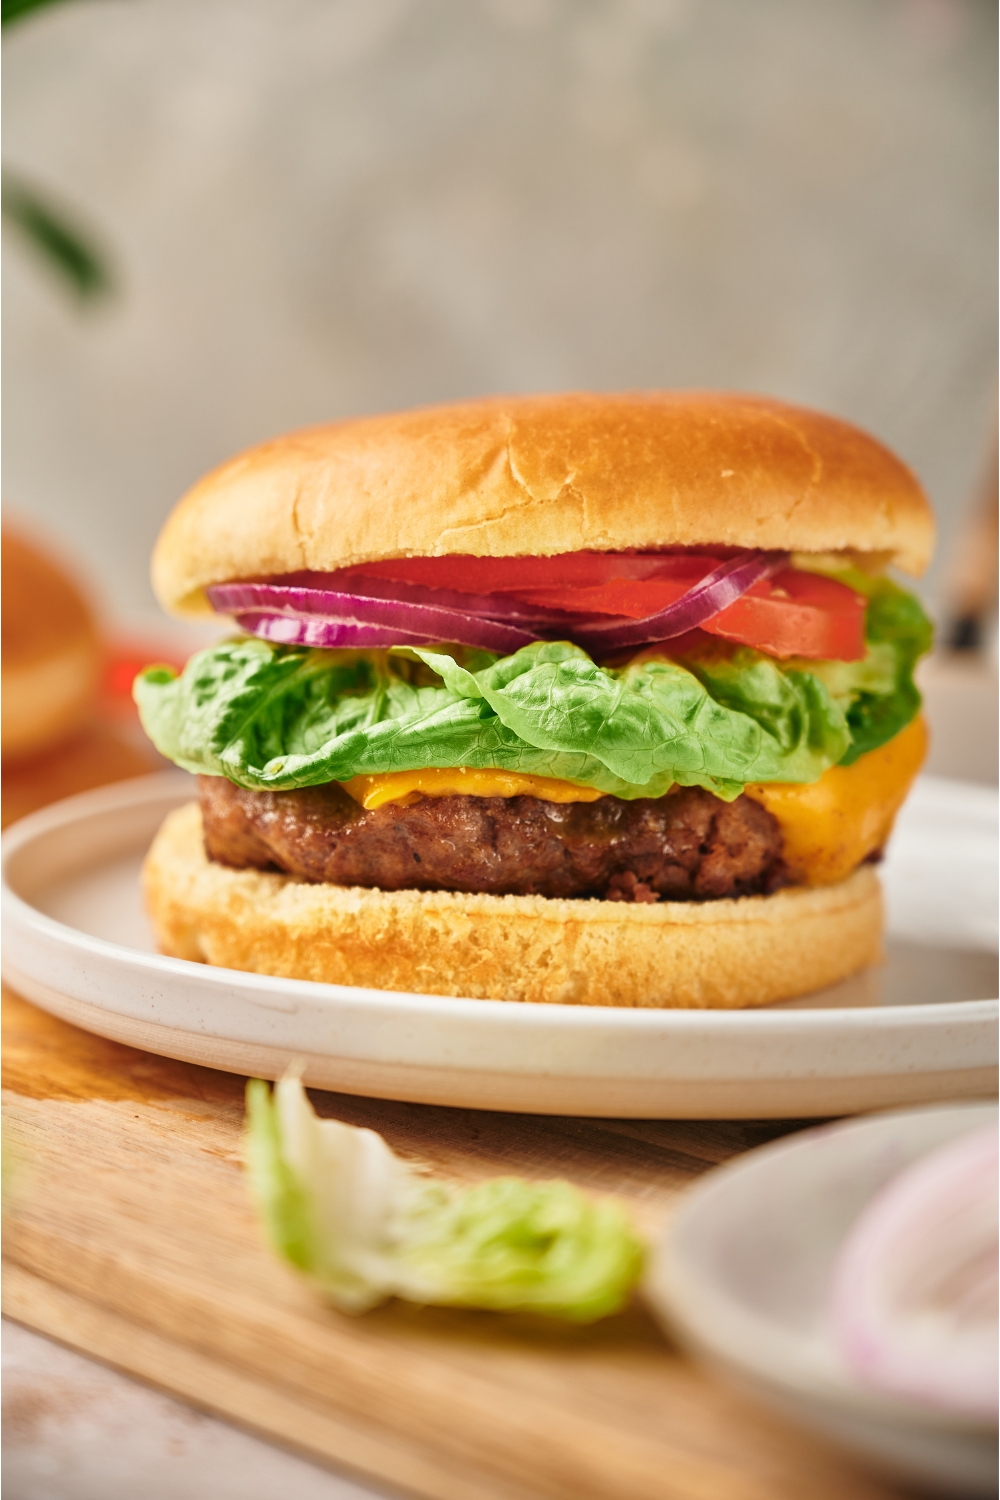 A cheeseburger with red onion, lettuce, and tomato on it. The burger is on a white plate atop a wood cutting board.